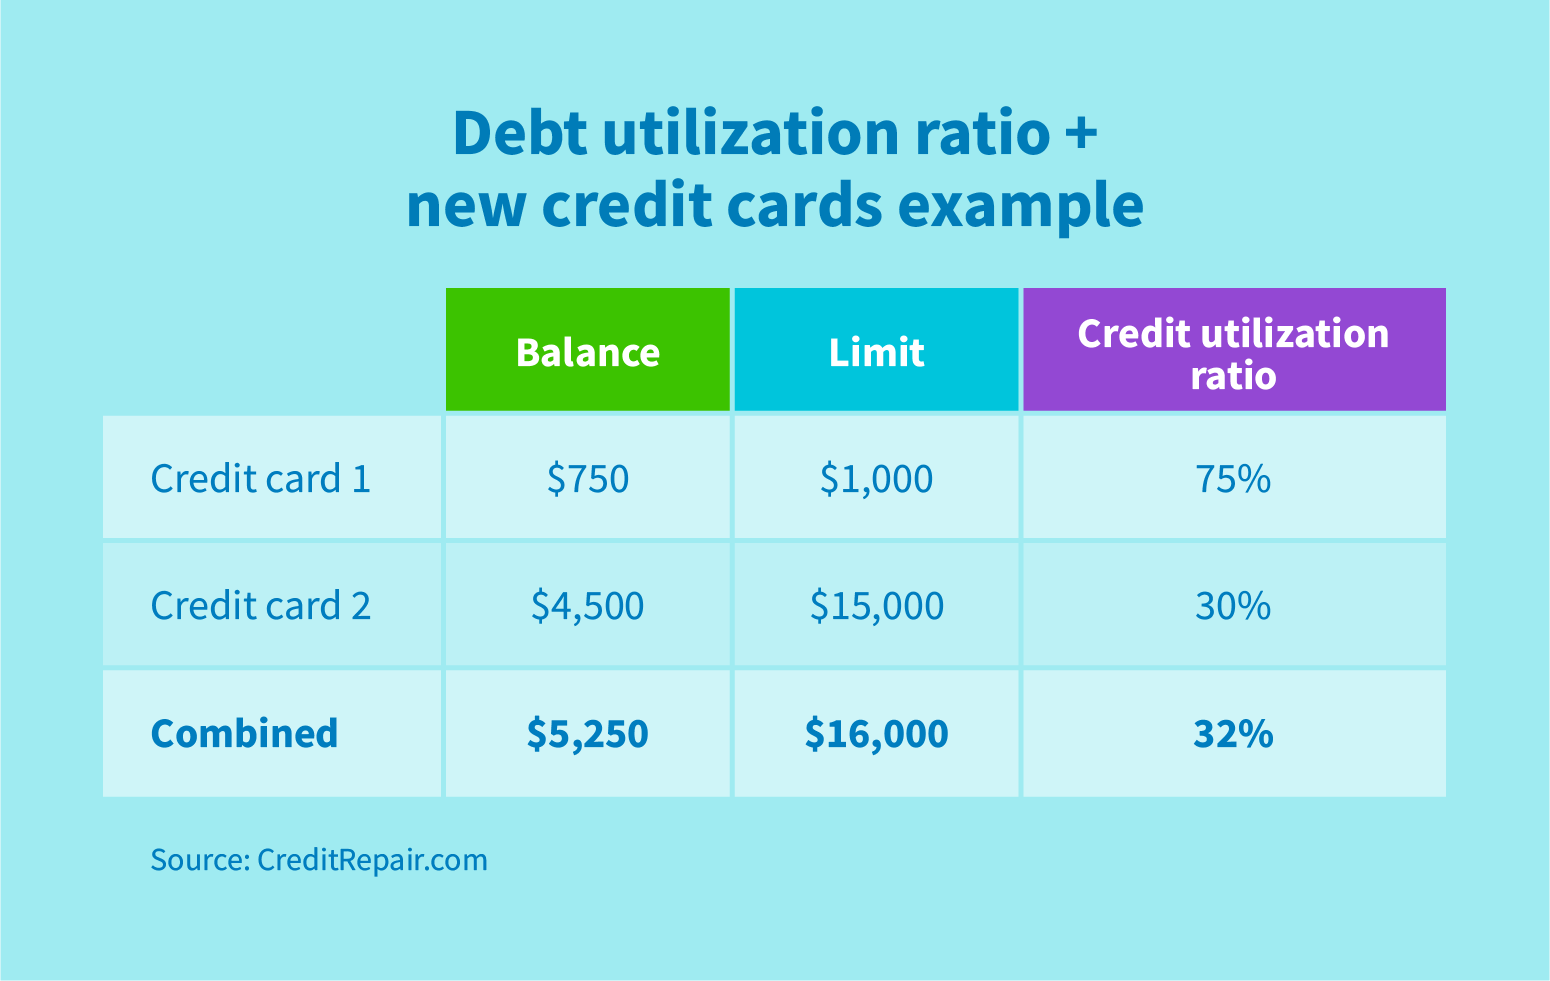 Debt utilization ratio and new credit cards example